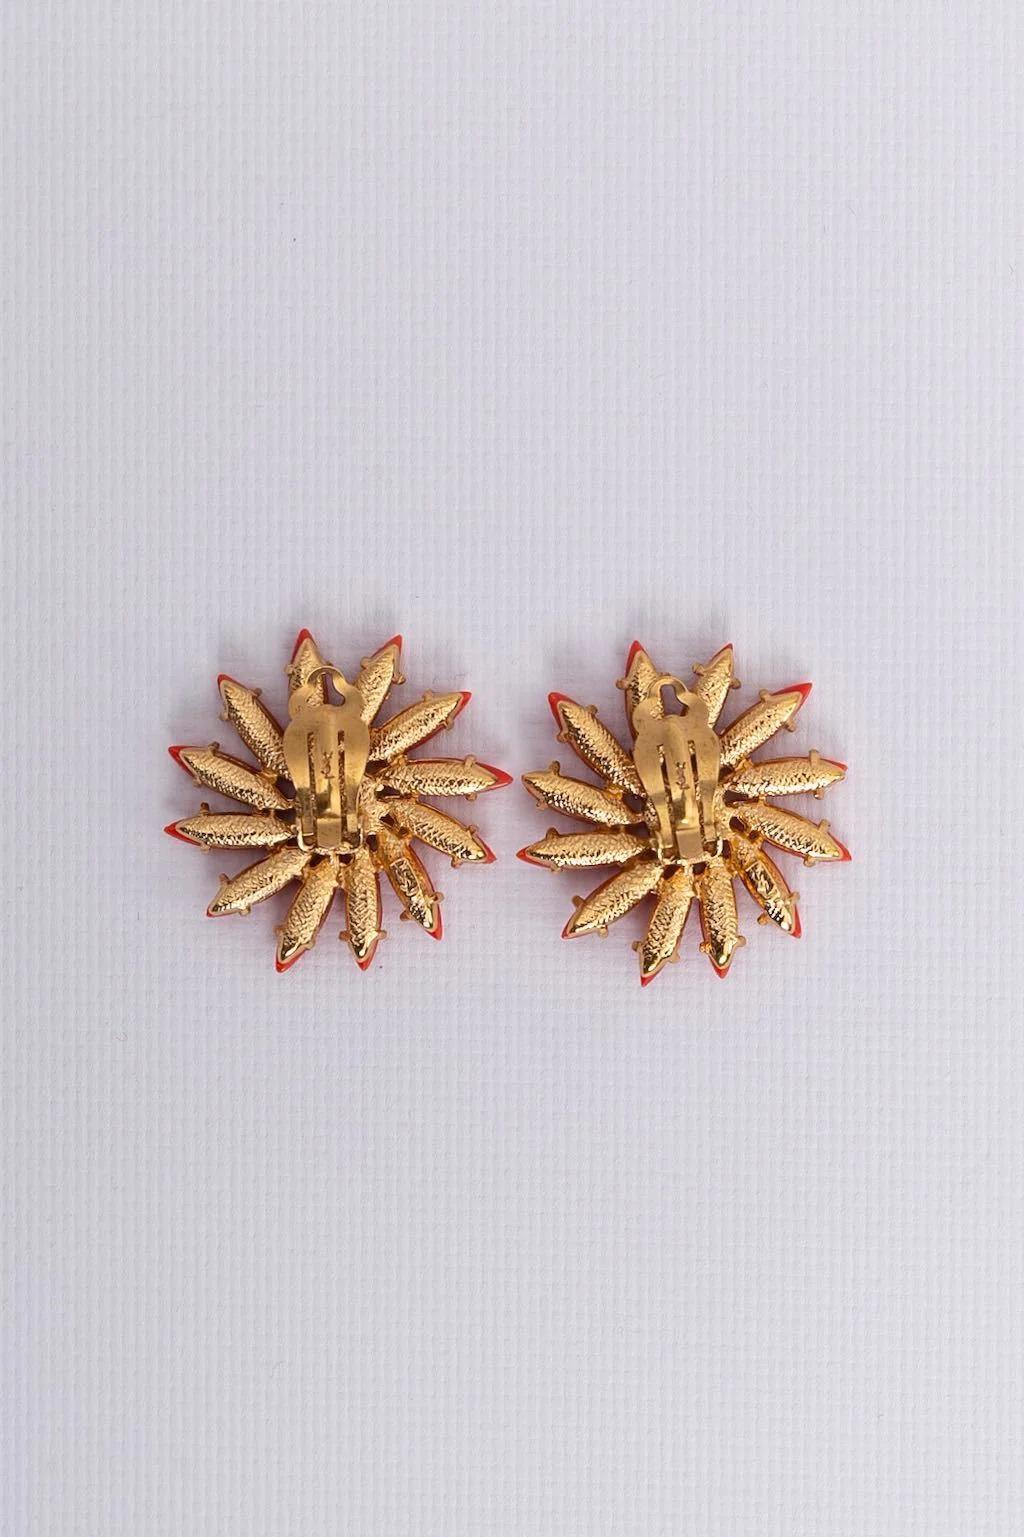 Yves Saint Laurent - (Made in France) Gilted metal clip-on earrings paved with orange cabochons and centered with a pink rhinestone.

Additional information:
Dimensions: Ø 4 cm (Ø 1.57